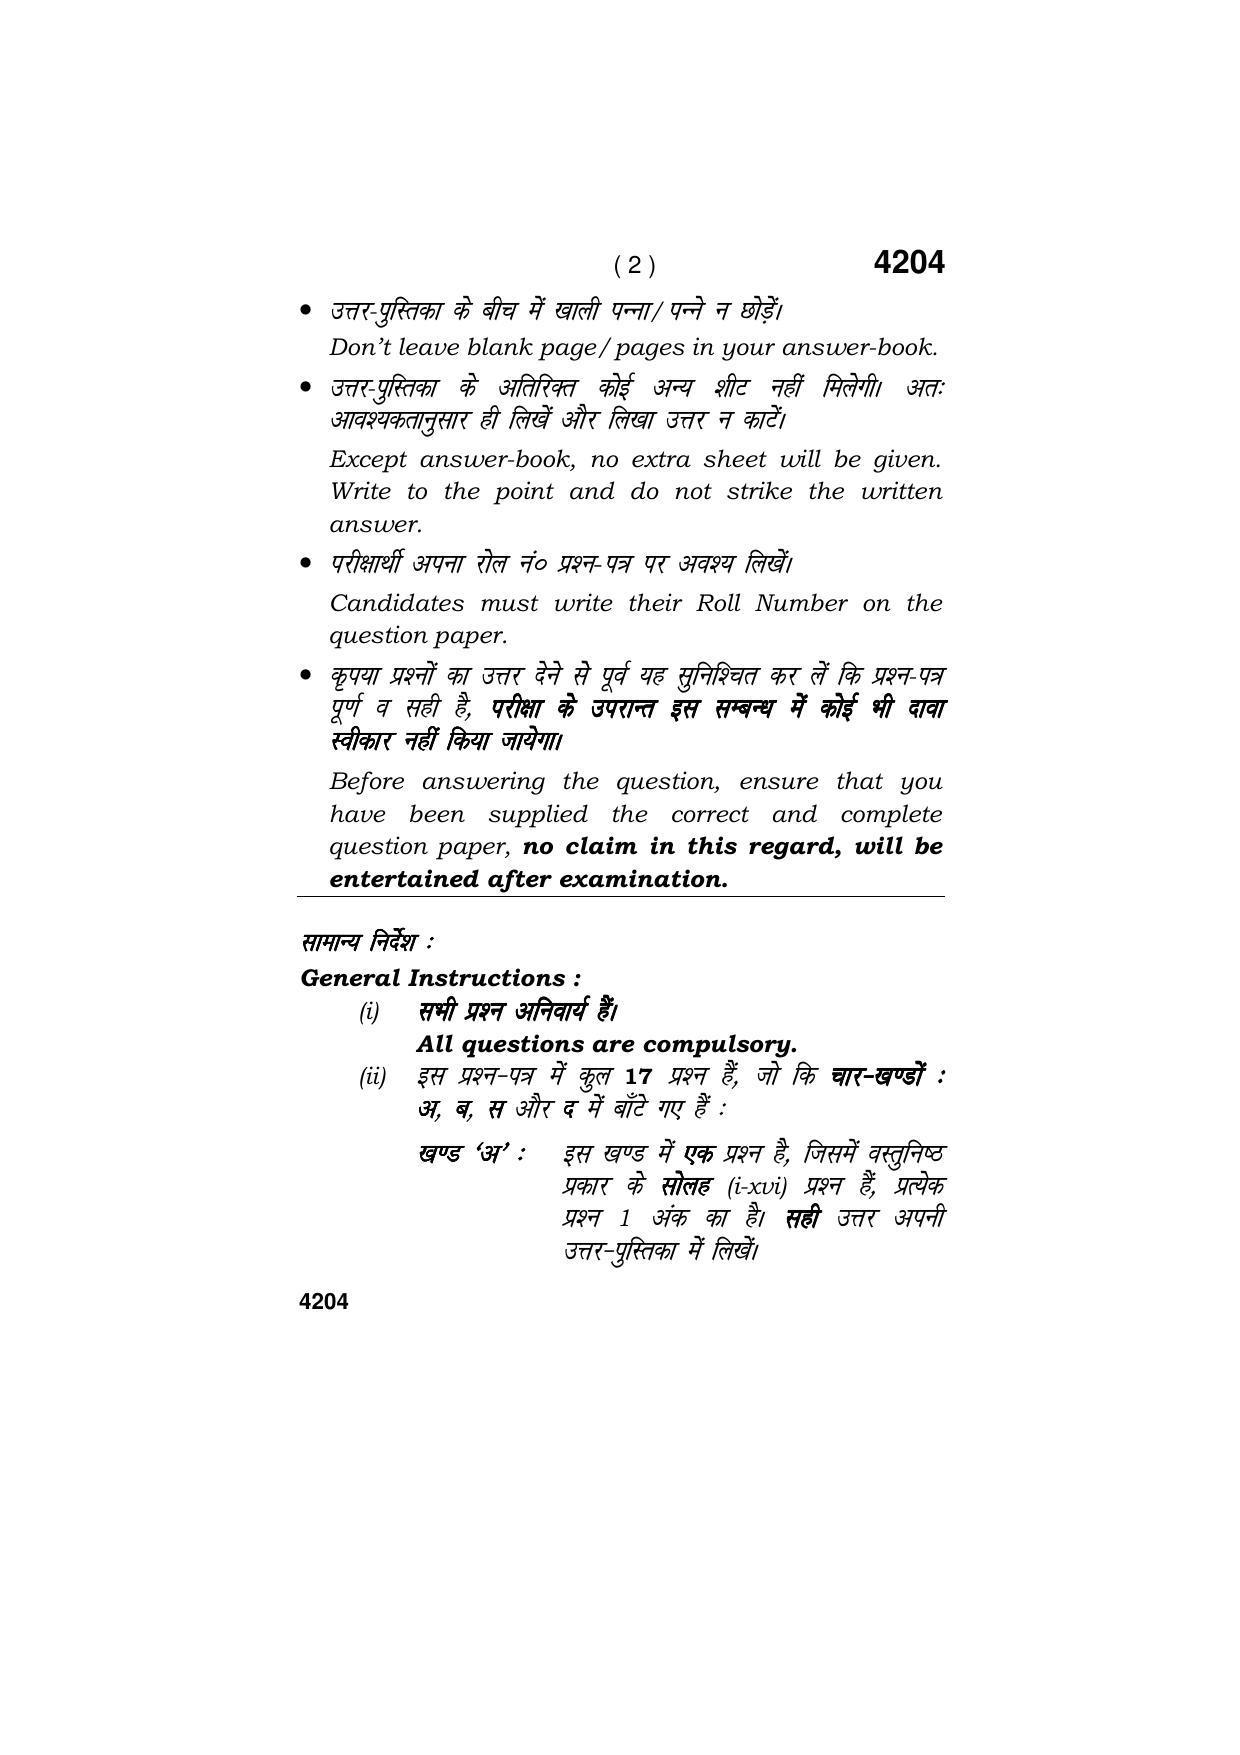 Haryana Board HBSE Class 10 Mathematics (Blind c) 2019 Question Paper - Page 2